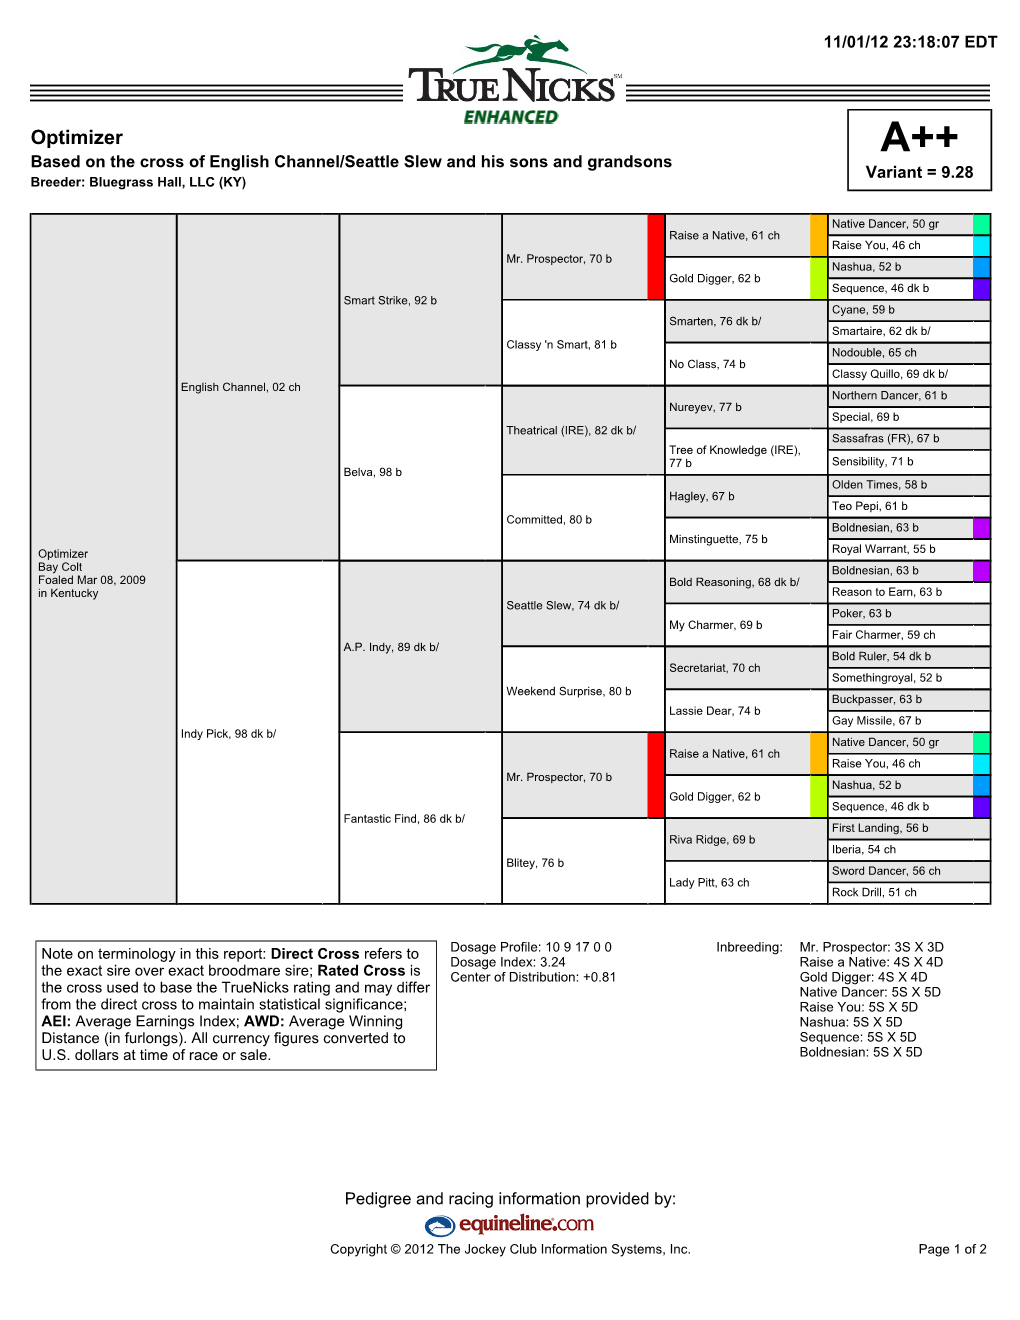 Optimizer A++ Based on the Cross of English Channel/Seattle Slew and His Sons and Grandsons Variant = 9.28 Breeder: Bluegrass Hall, LLC (KY)